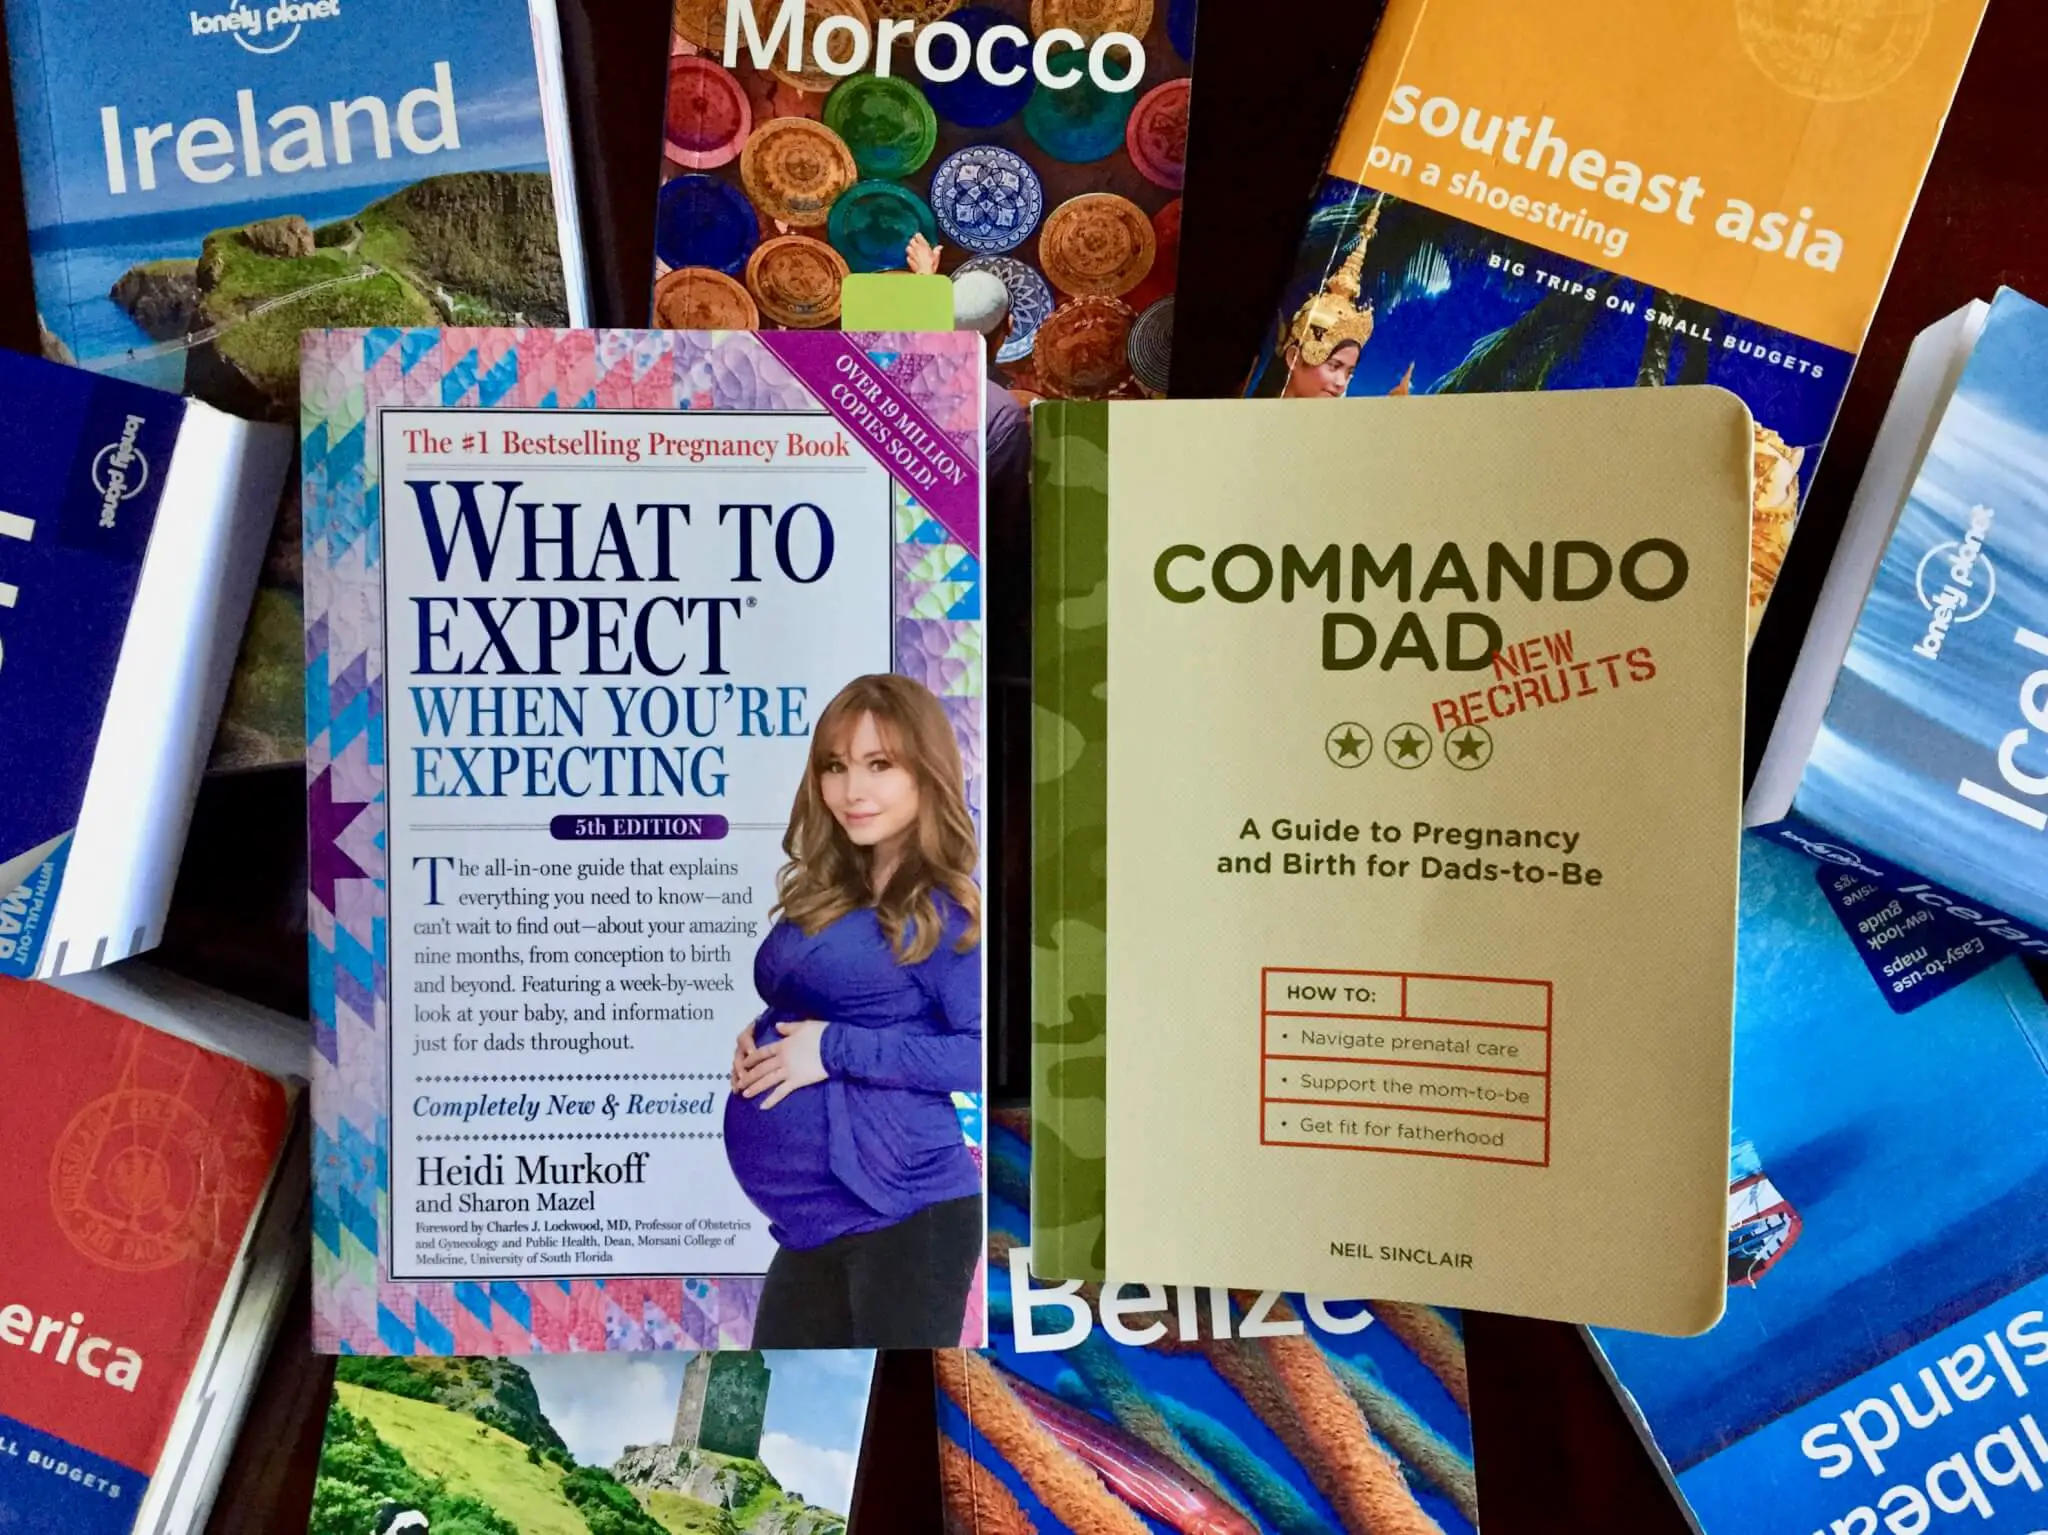 Parenting books on top of Lonely Planet travel guidebooks